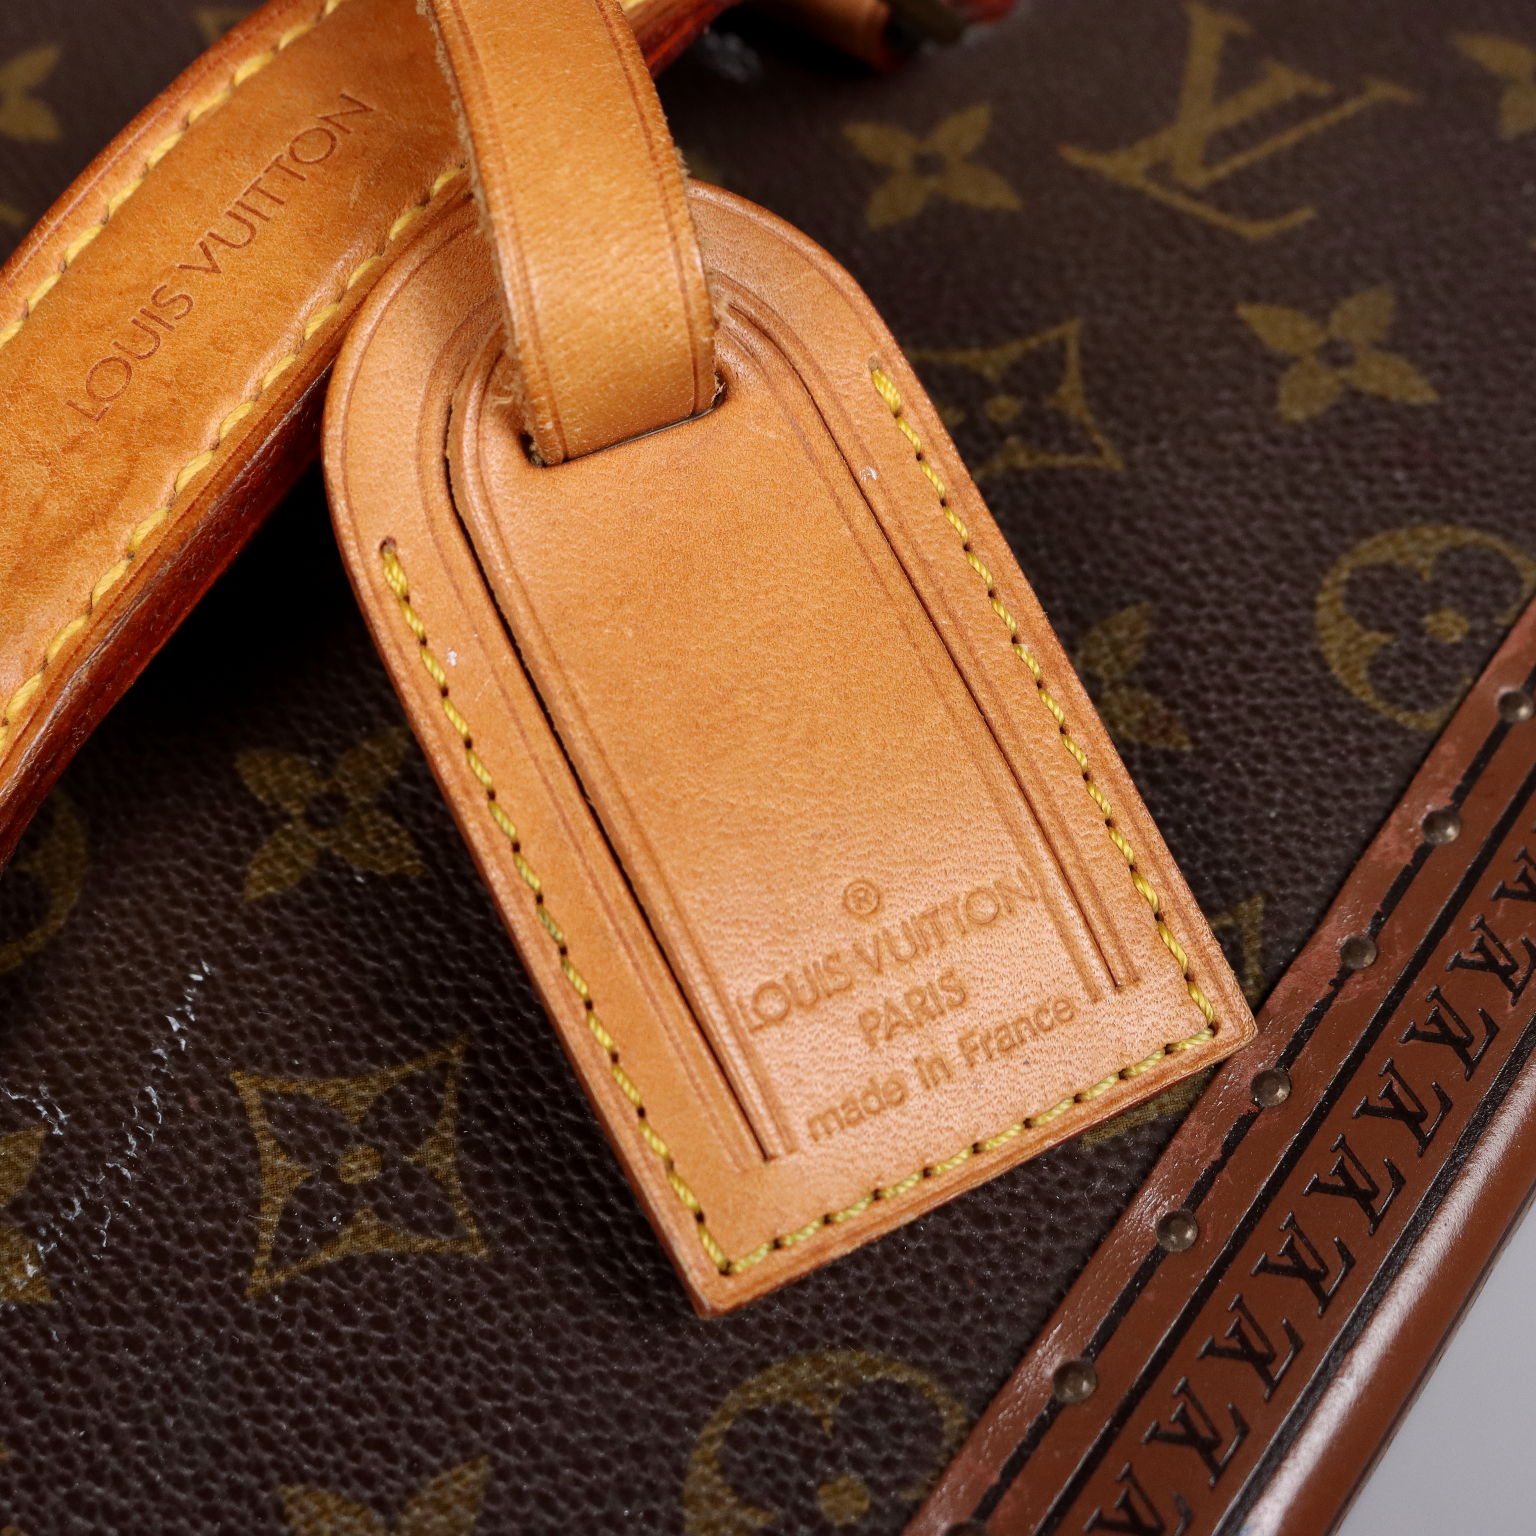 Louis Vuitton..made in Italy marchiato francese.